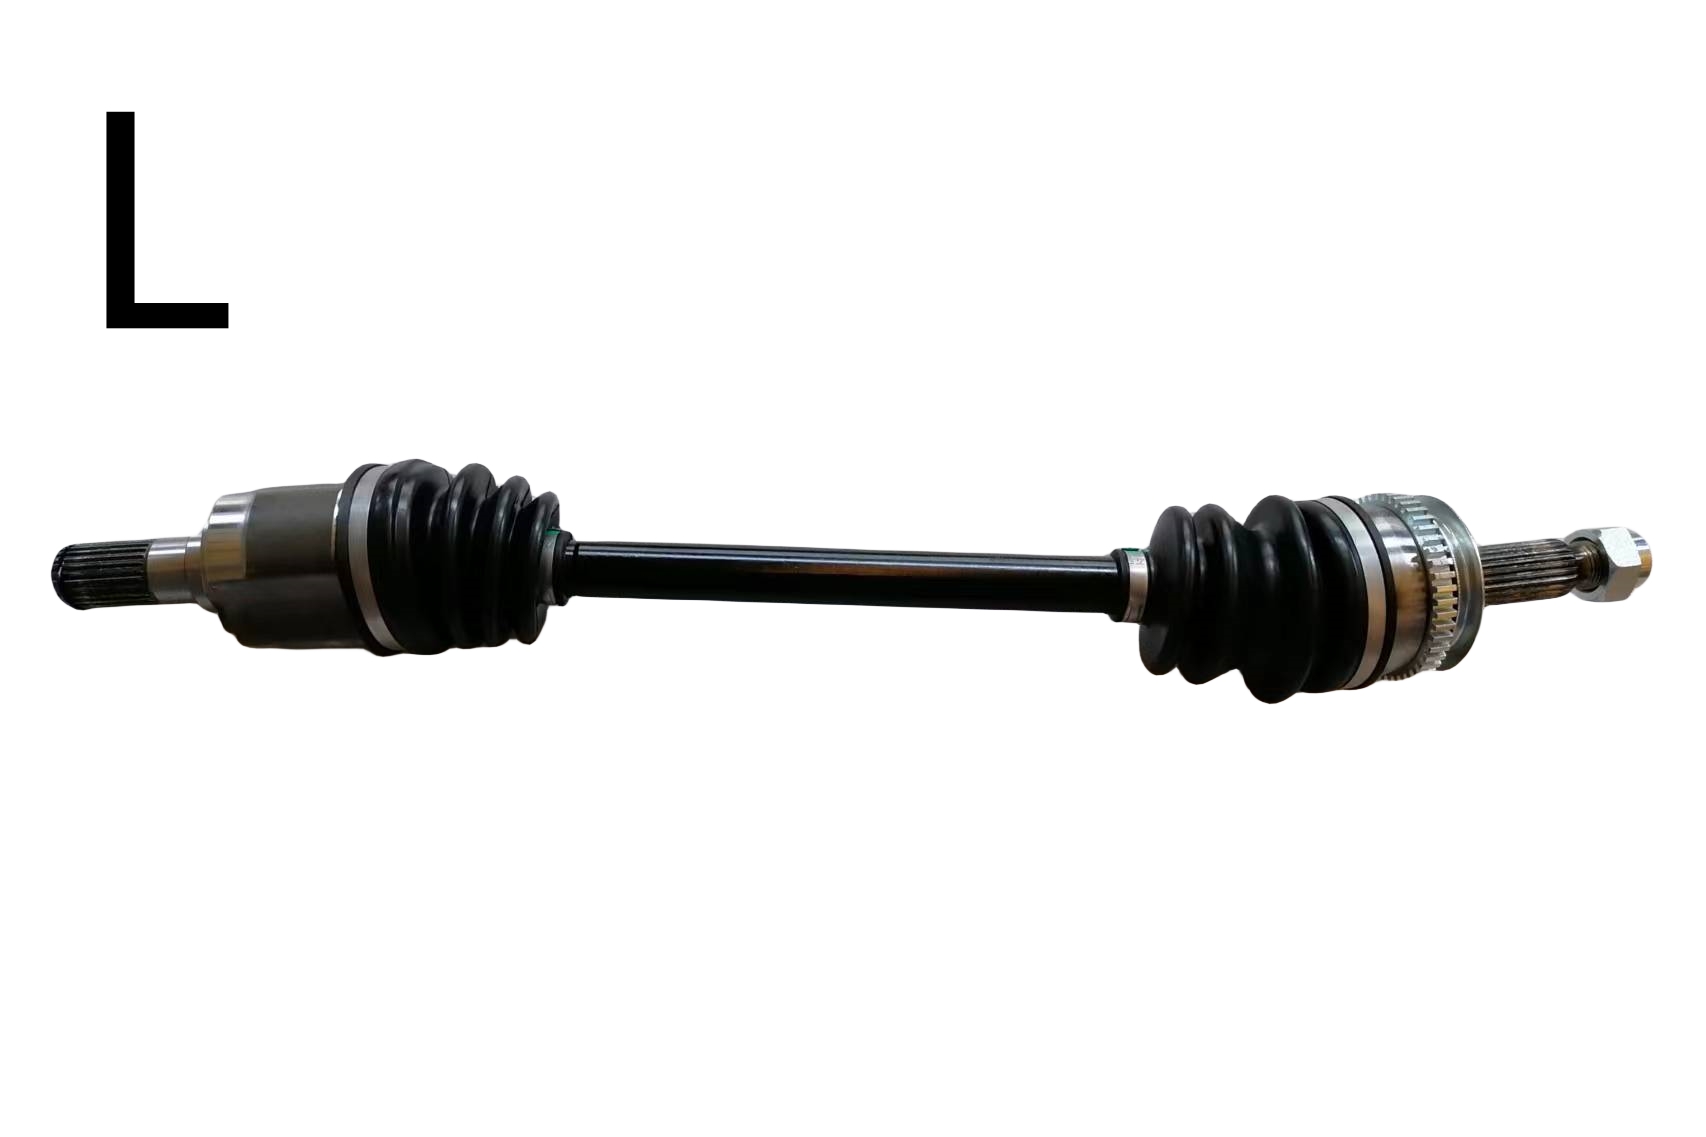 DRS91931
                                - PICANTOMORNING  07-09
                                - Drive Shaft
                                ....223428